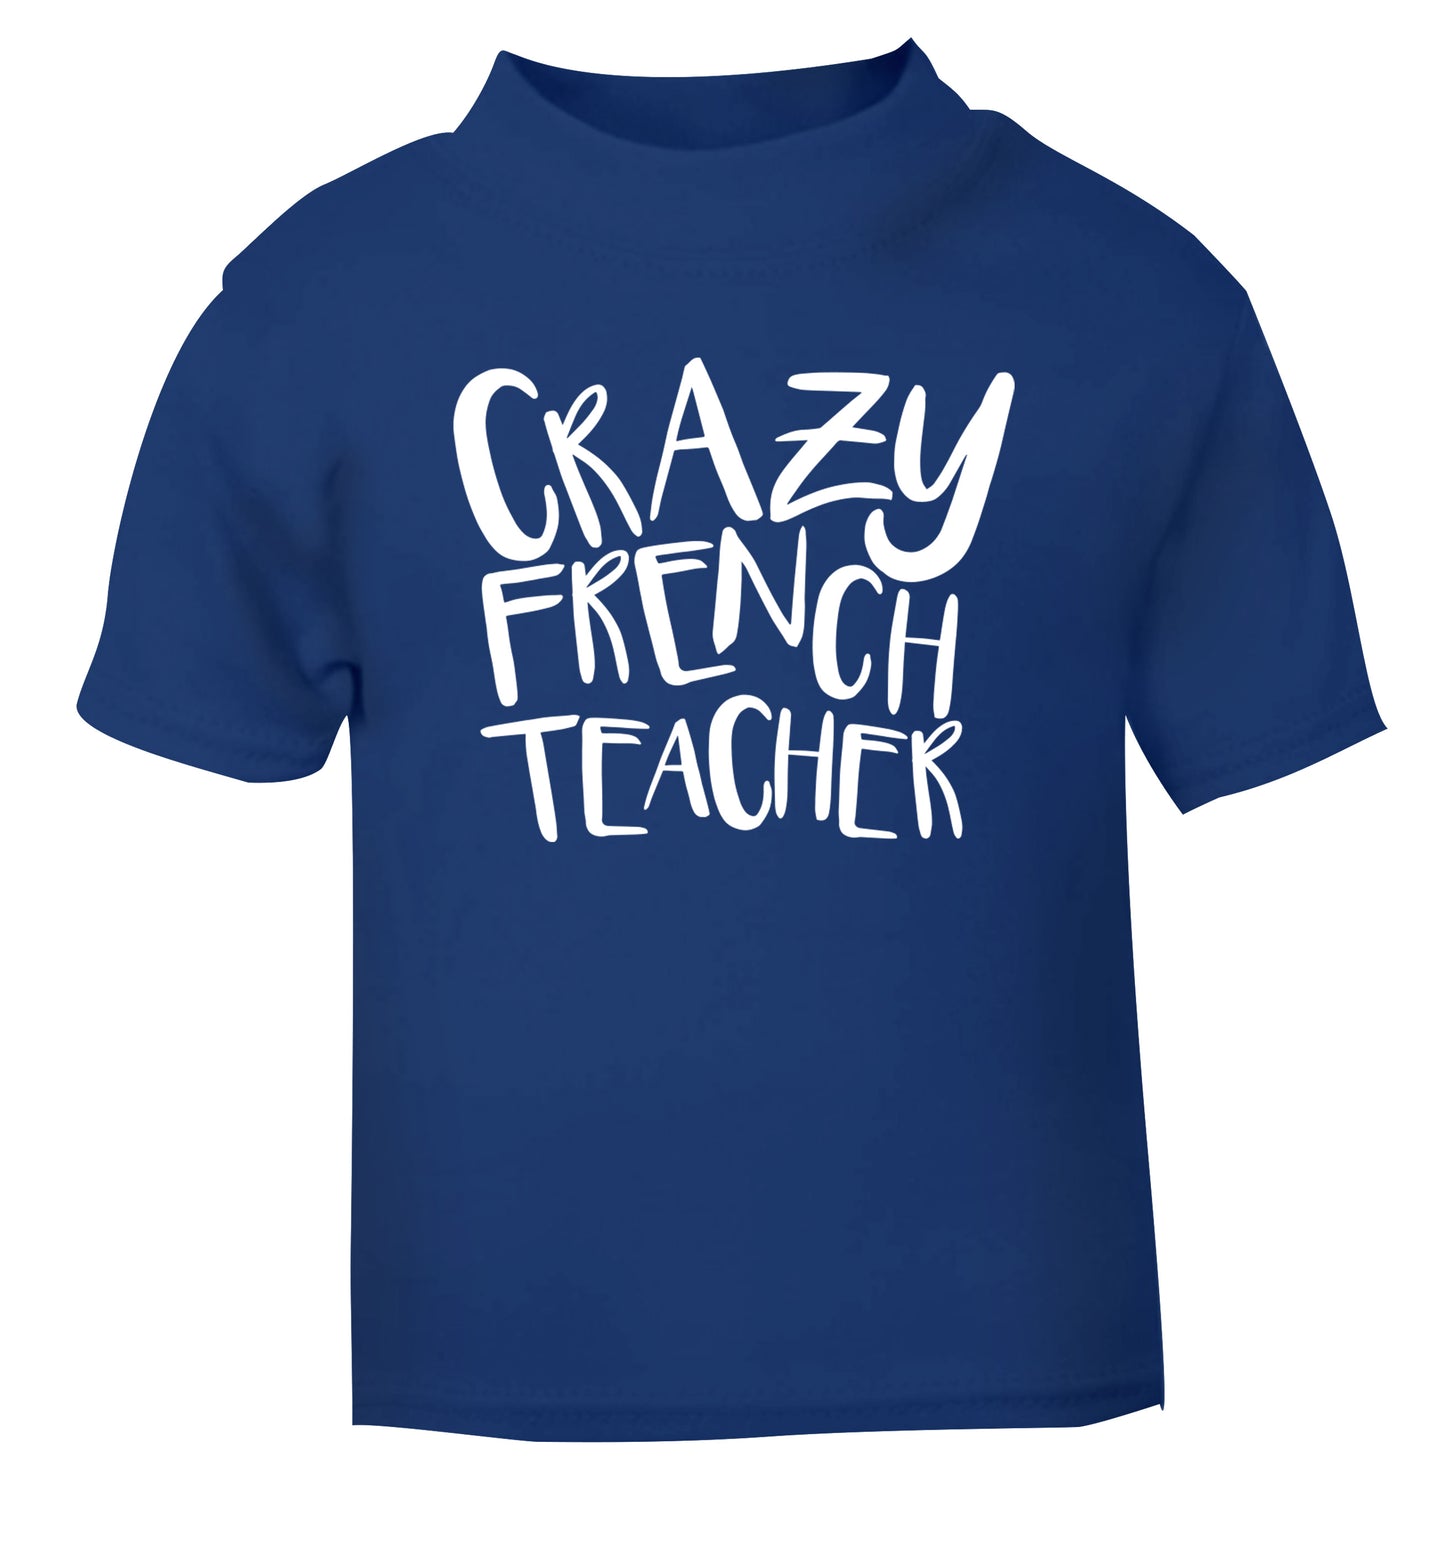 Crazy french teacher blue Baby Toddler Tshirt 2 Years